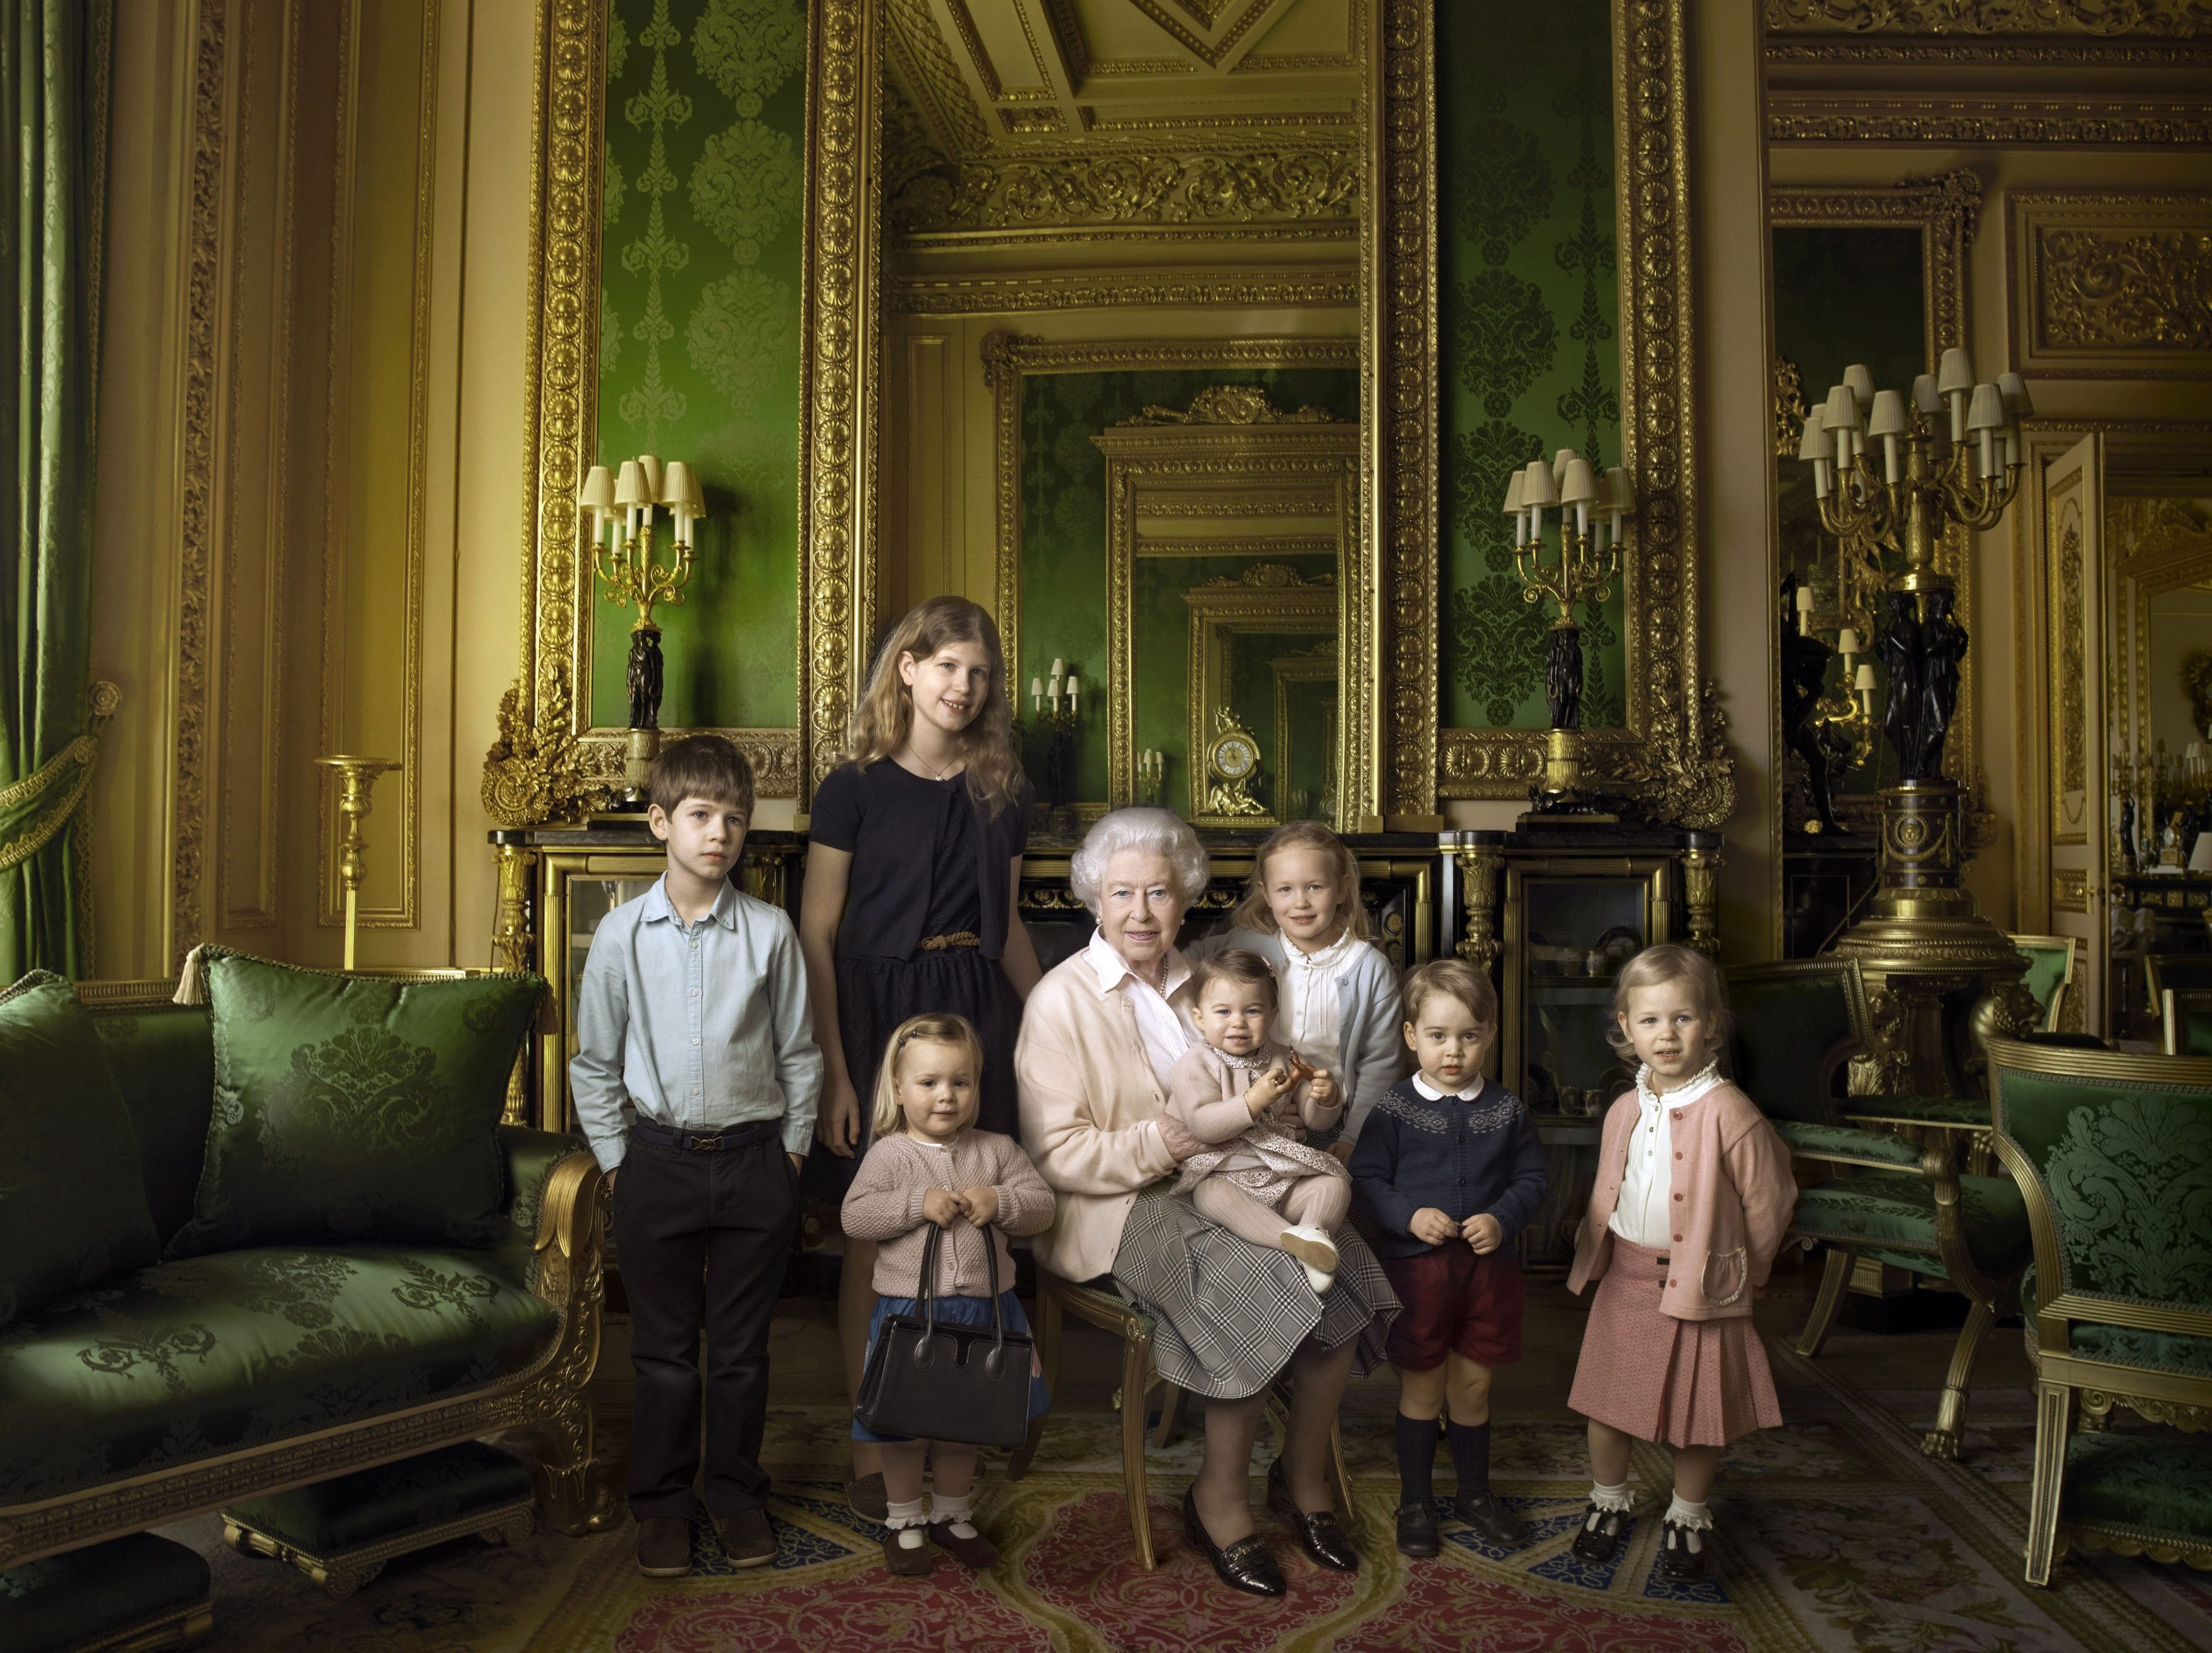 Annie leibovitz photos show relaxed queen and little royals